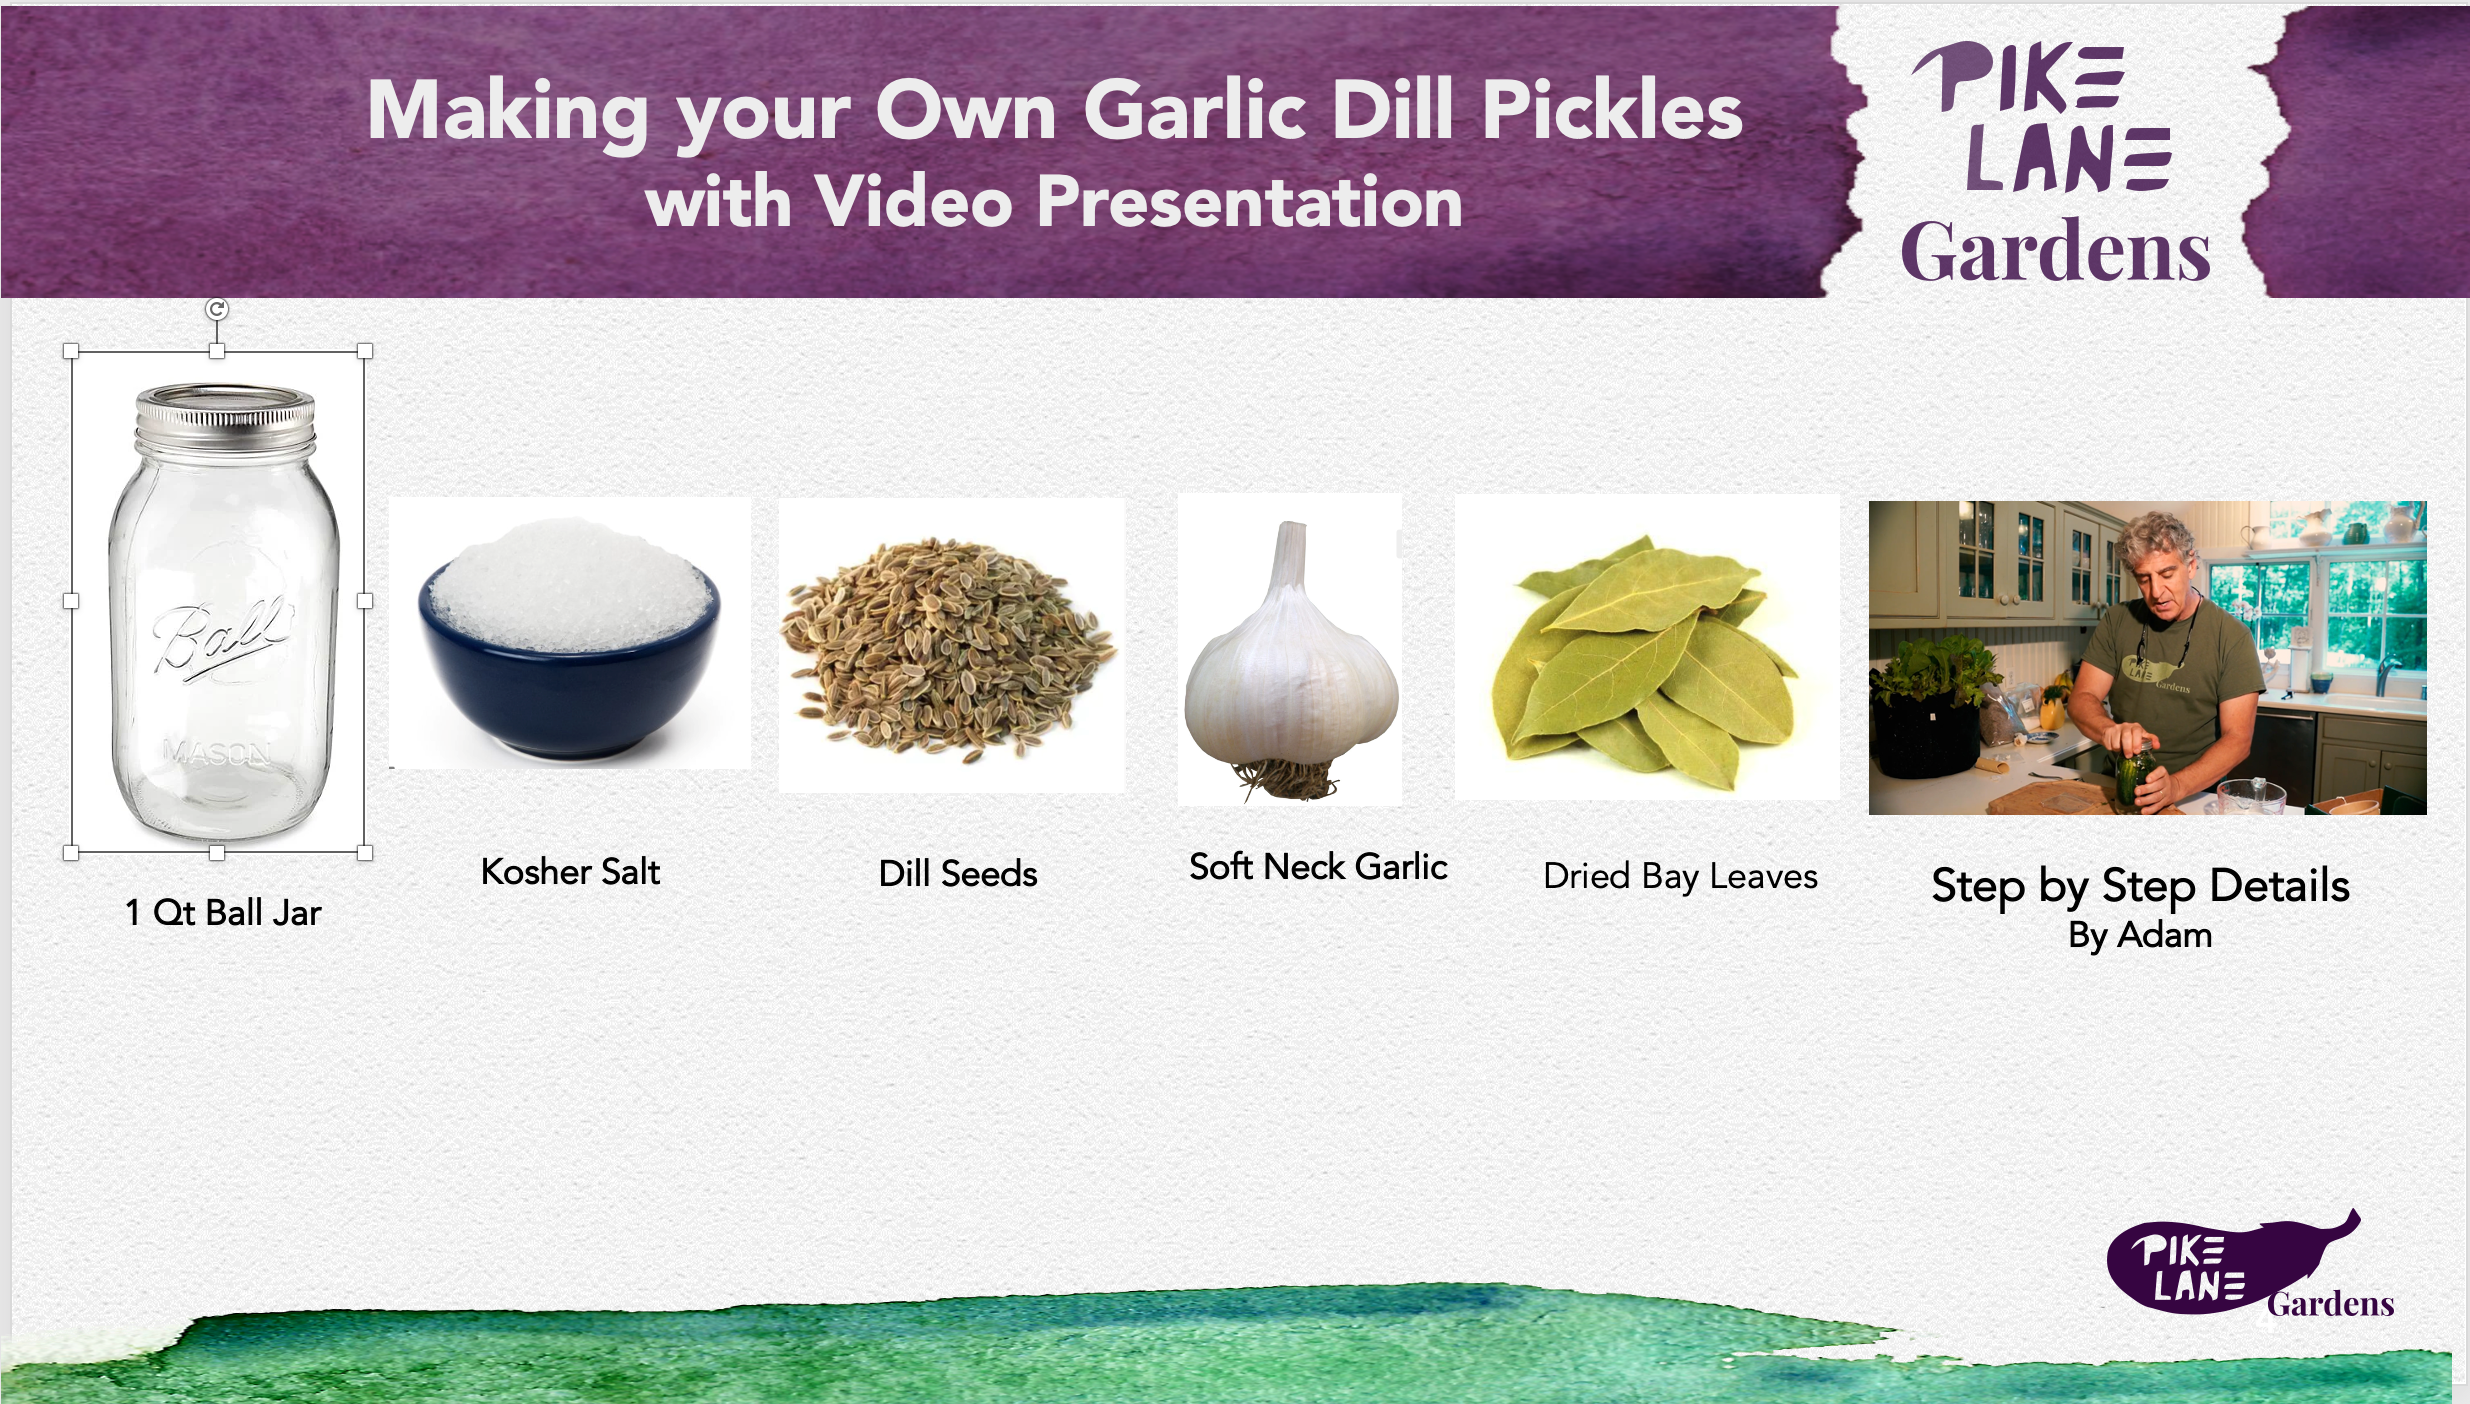 Cooking With Garlic